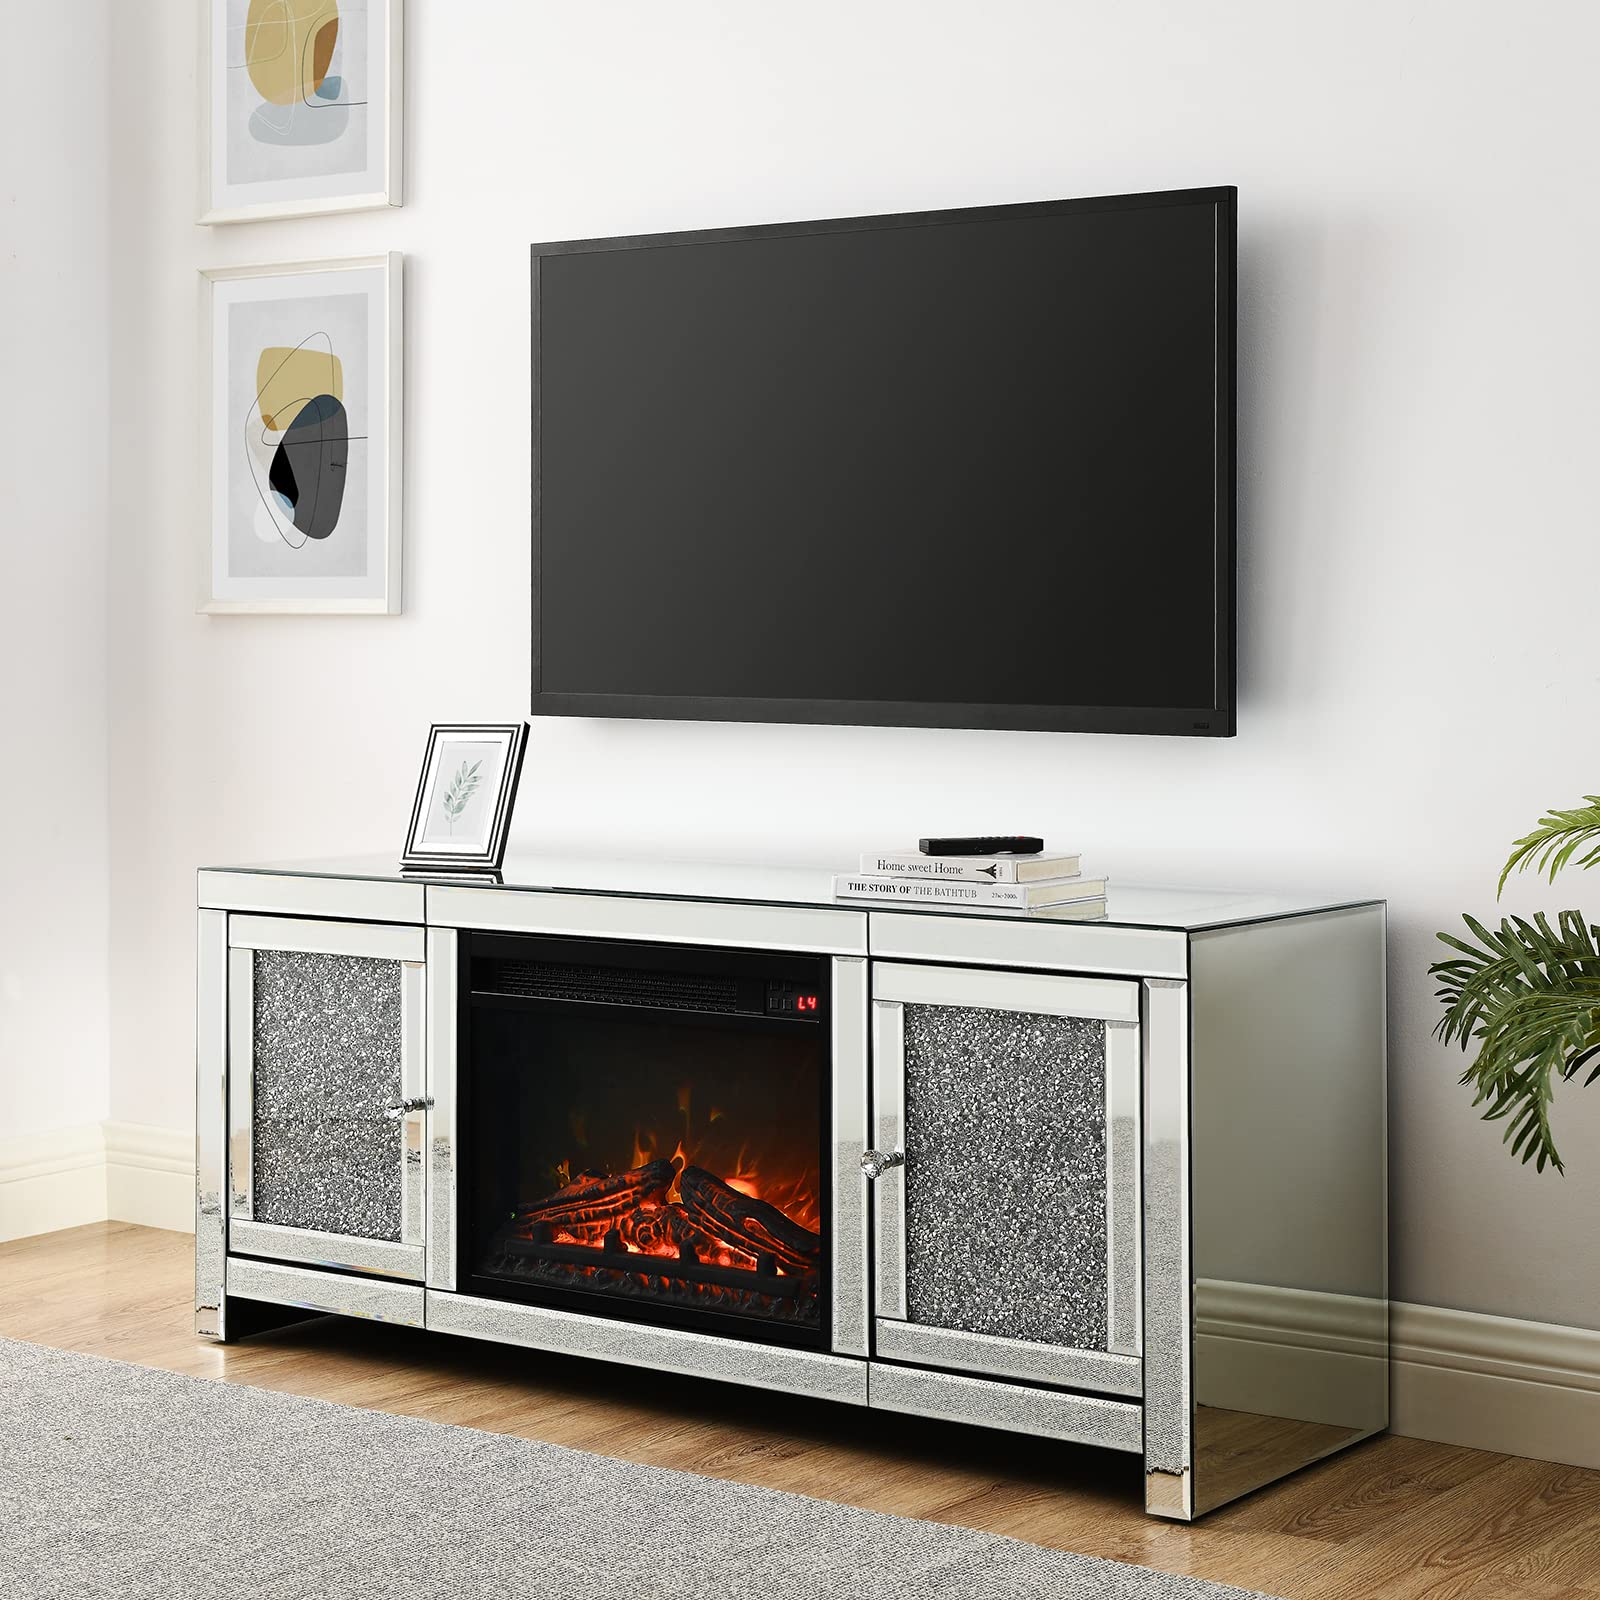 Alohappy Fireplace TV Stand for TVs up to 55A Mirrored TV Stand with 18A Fireplace LED Light Home Media Entertainment center with 2 Stora